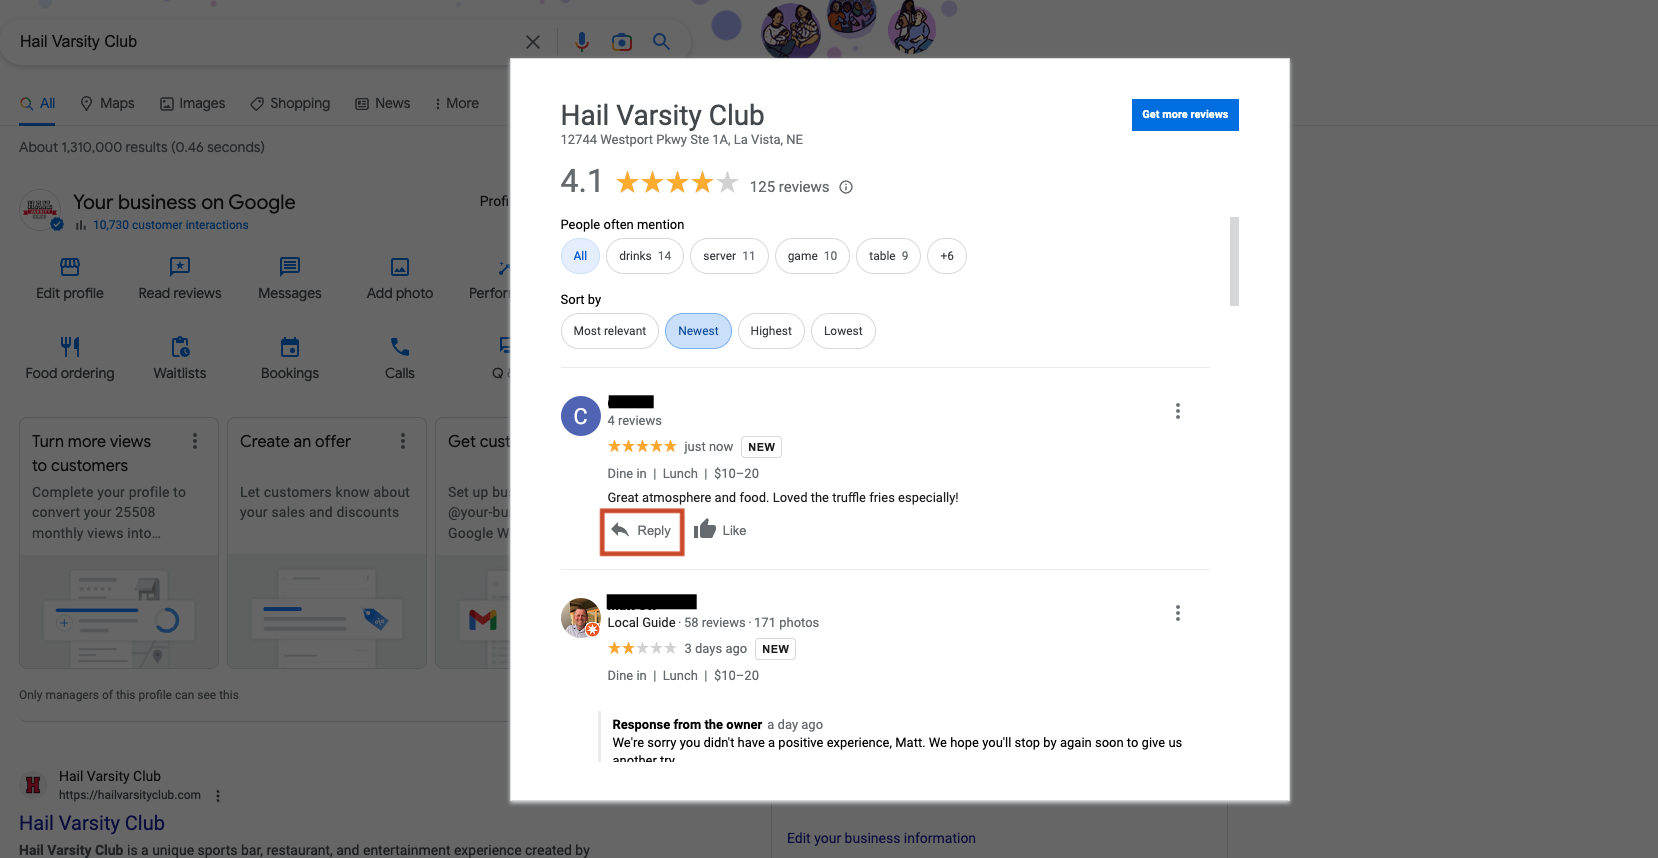 Screenshot of Hail Varsity Club reviews with red box around Reply for a recent comment